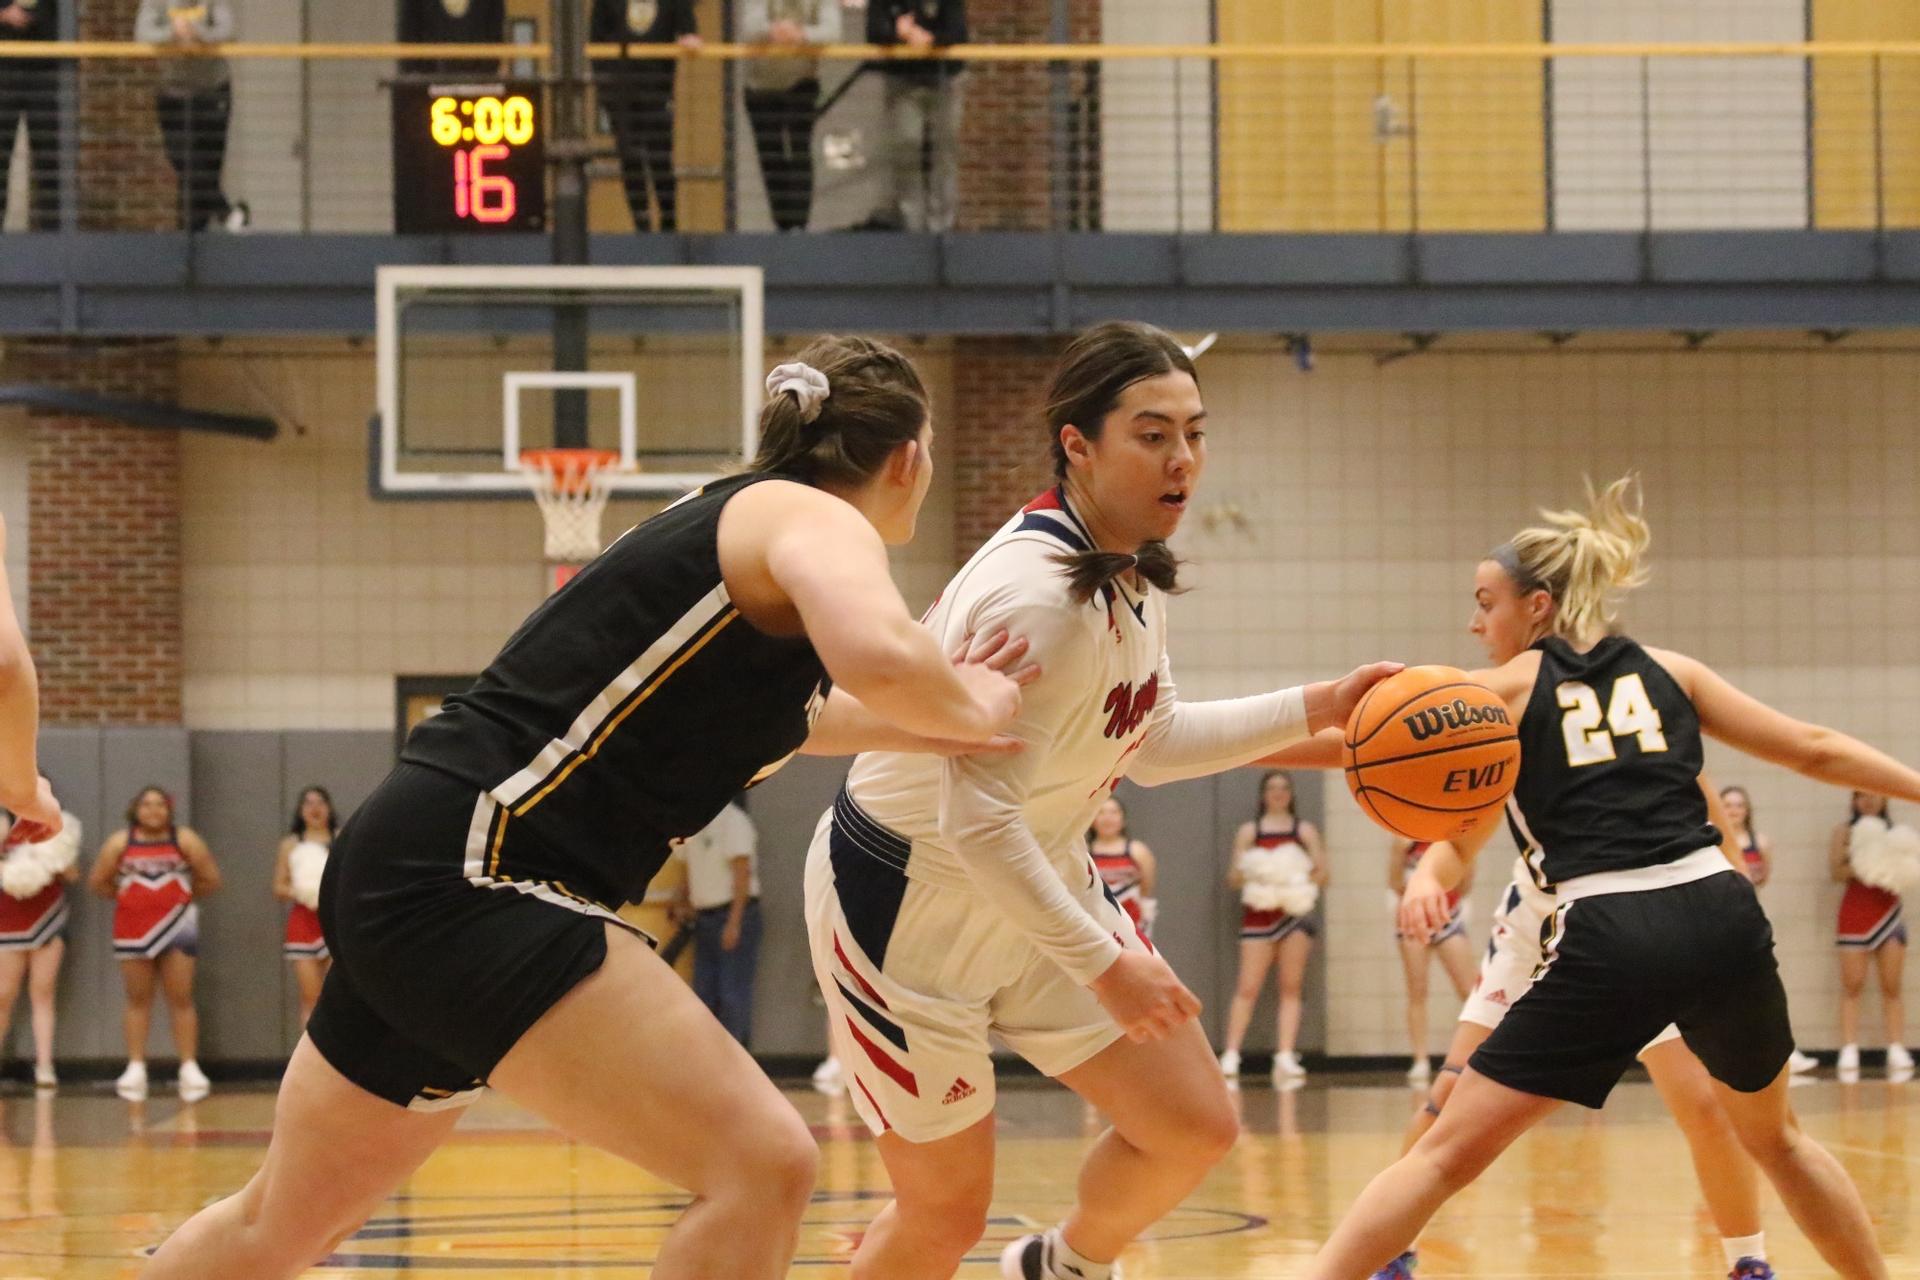 Women's basketball team has experienced ups and downs